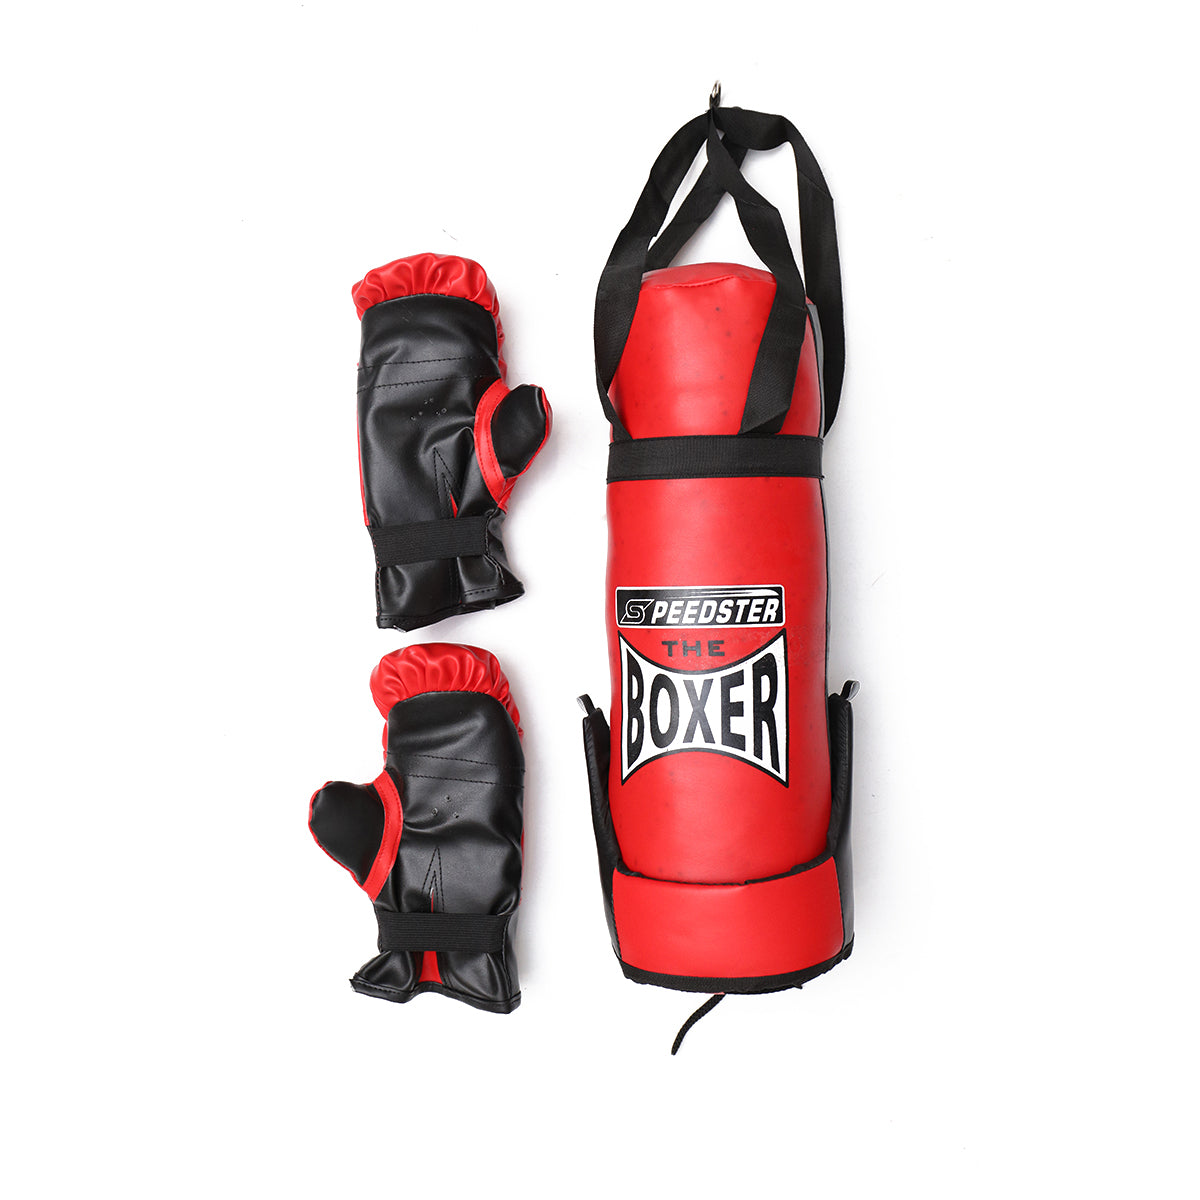 Speedster The Boxer: Boxing Combo Set (7681416495328)